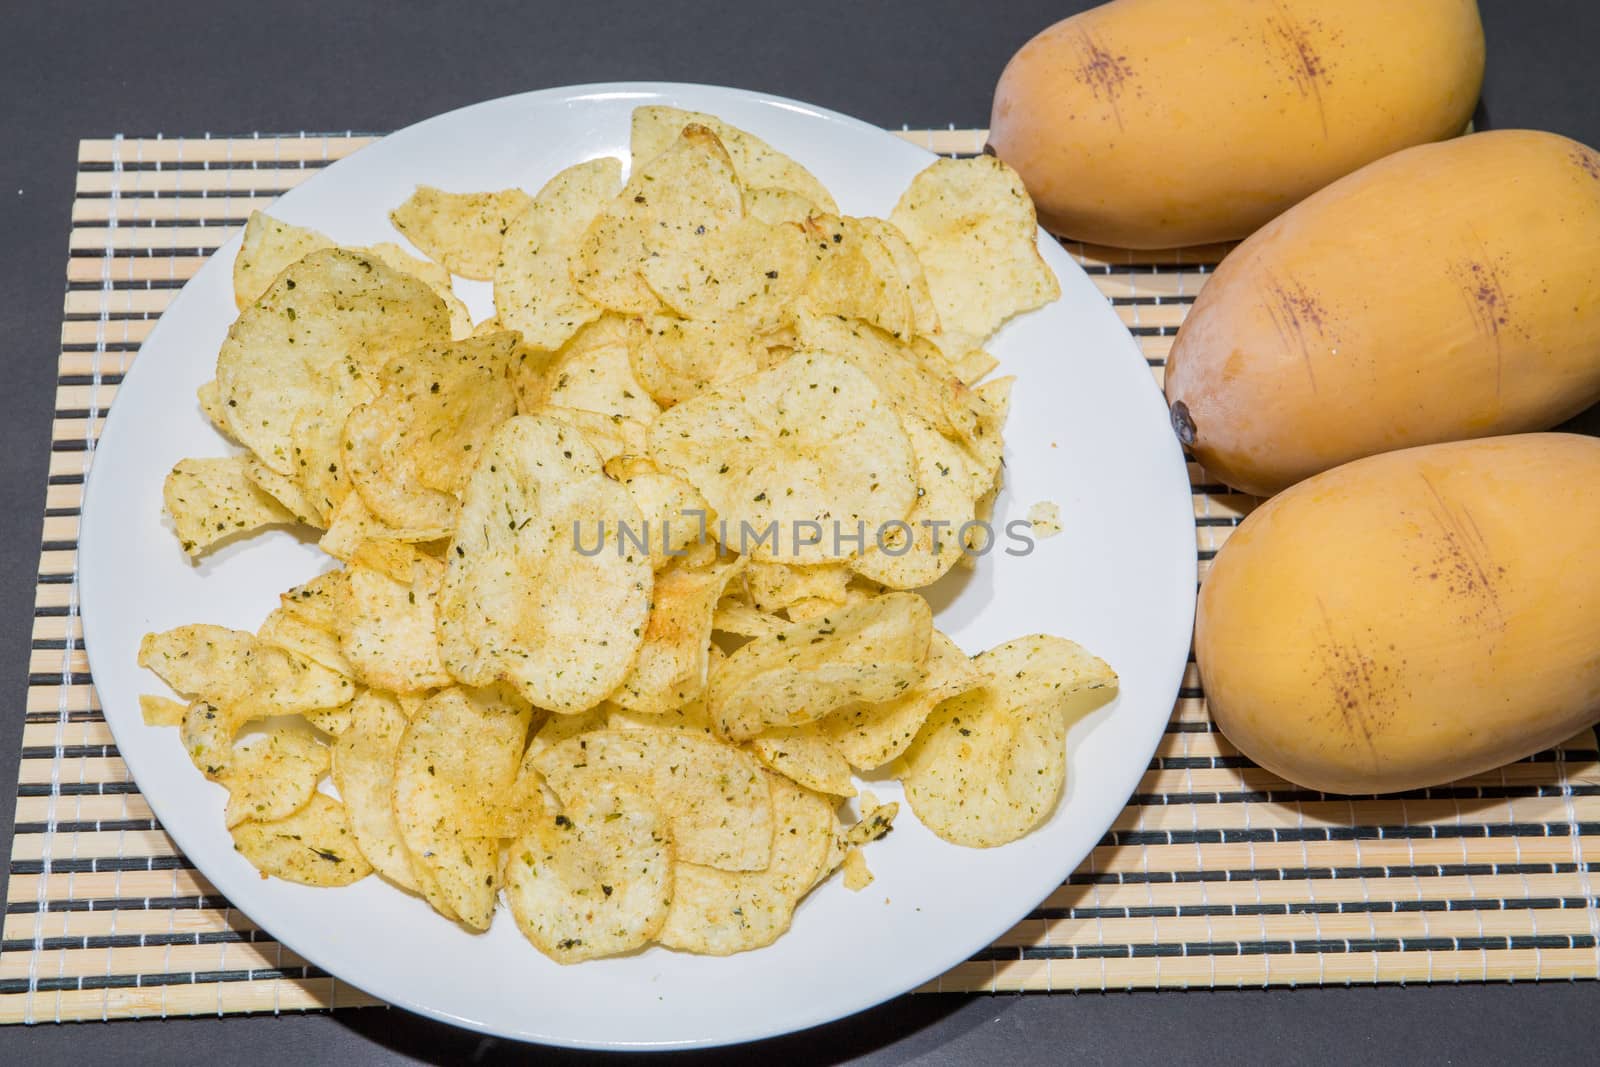 Fried potatoes, cut into pieces, mixed spices.